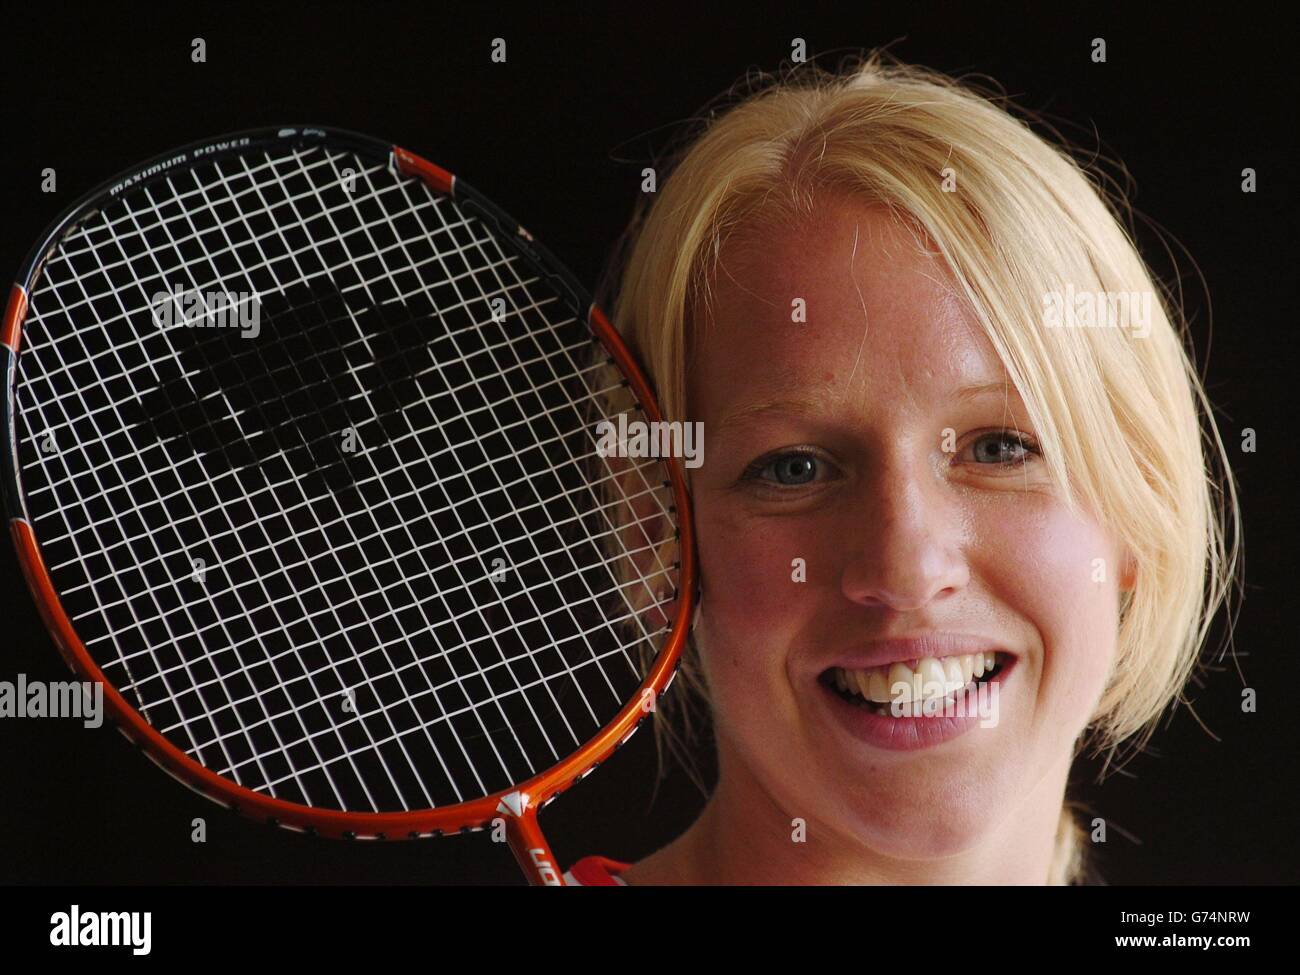 Gail Emms from Bedford member of the British olympic Badminton team, in Coral Beach Bay, the GB Olympic Holding Camp in Cyprus. Stock Photo